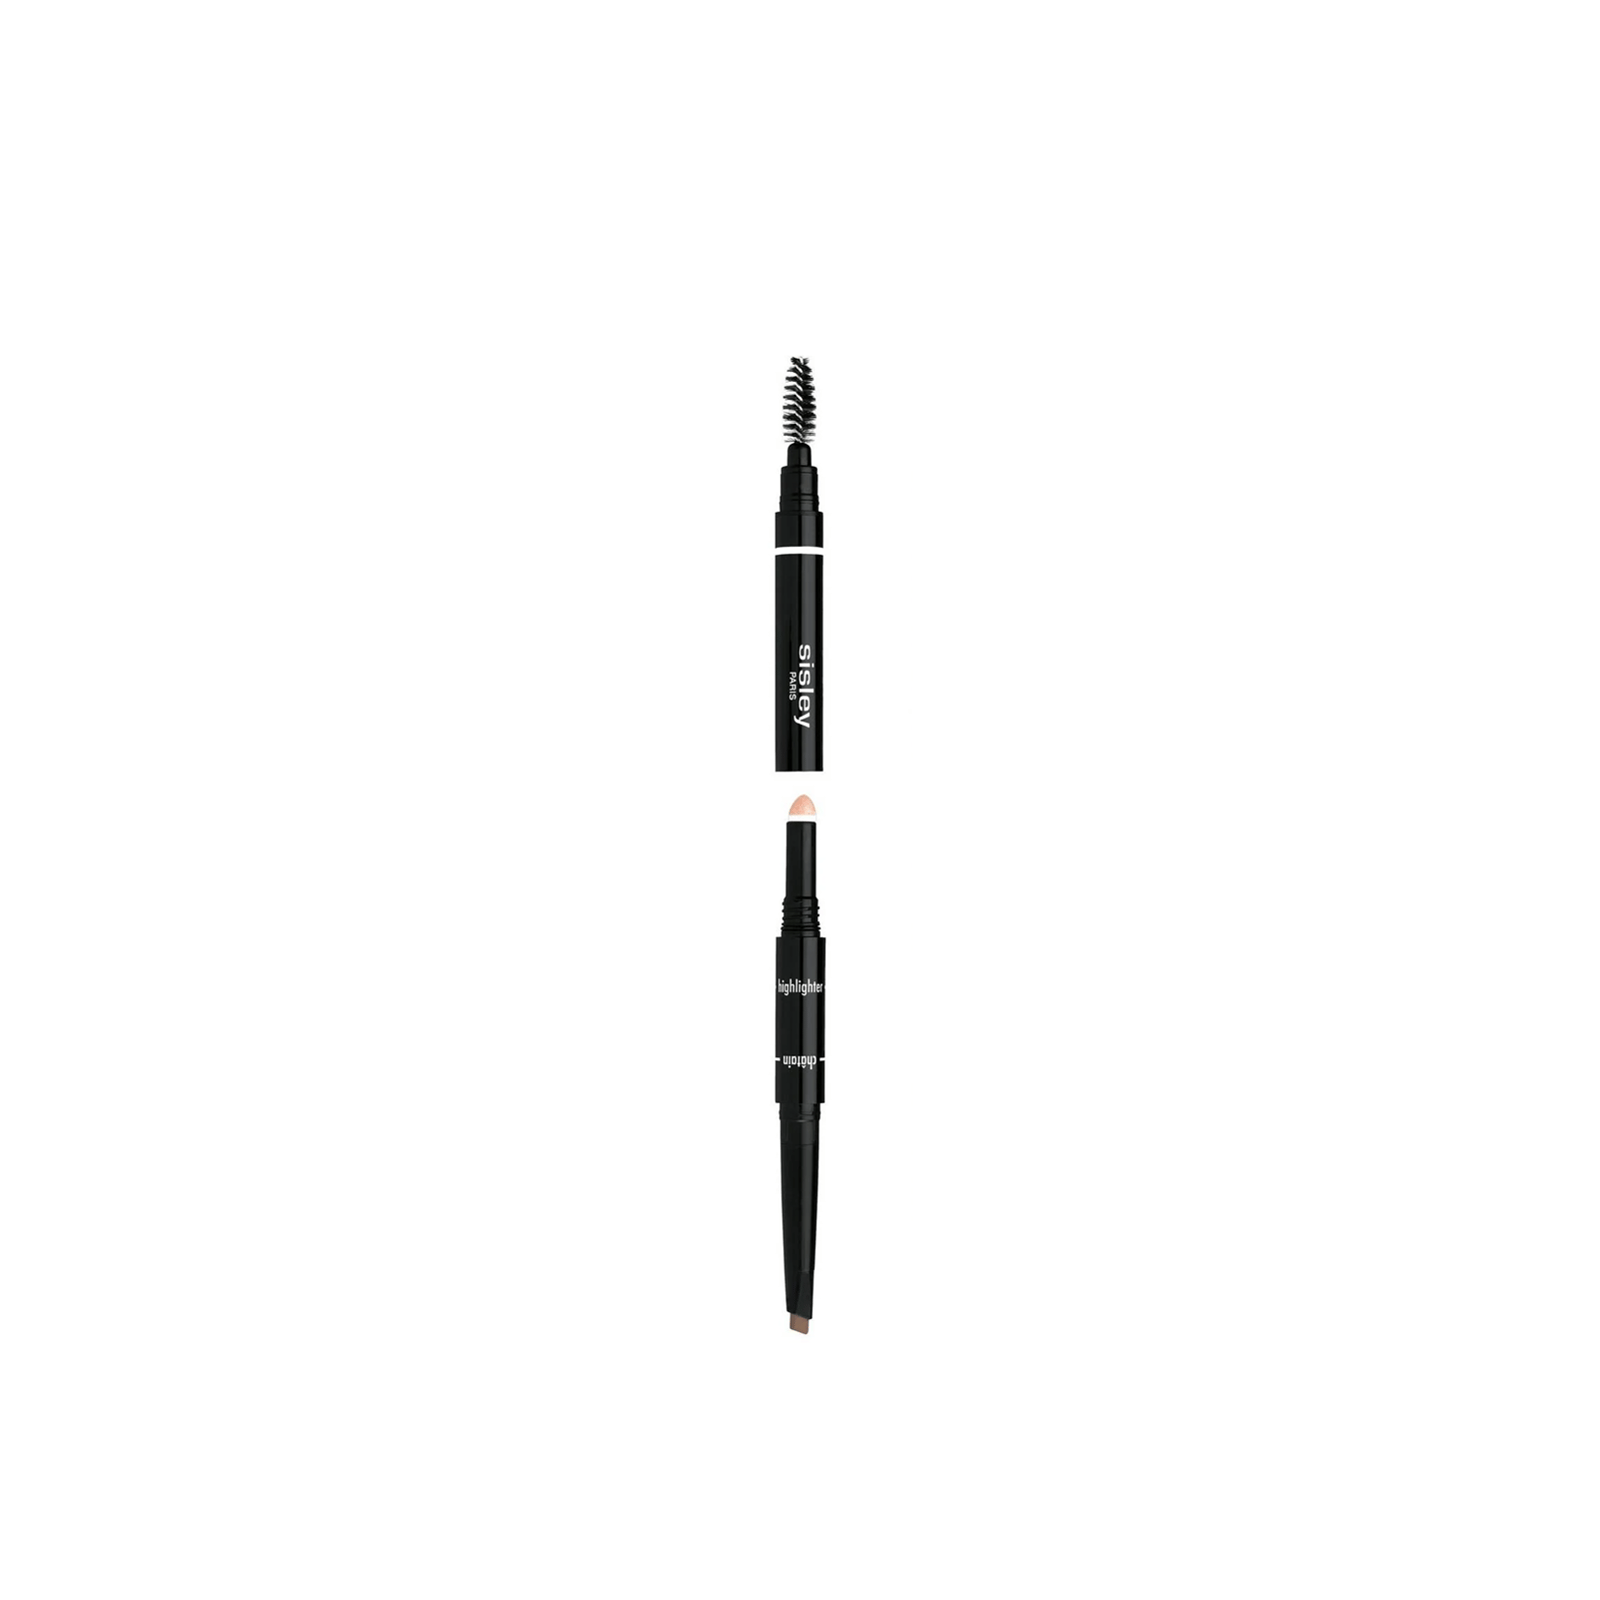 Sisley Paris Phyto Sourcils Design 3-In-1 Brow Architect Pencil 2 Chatain 2x0.2g